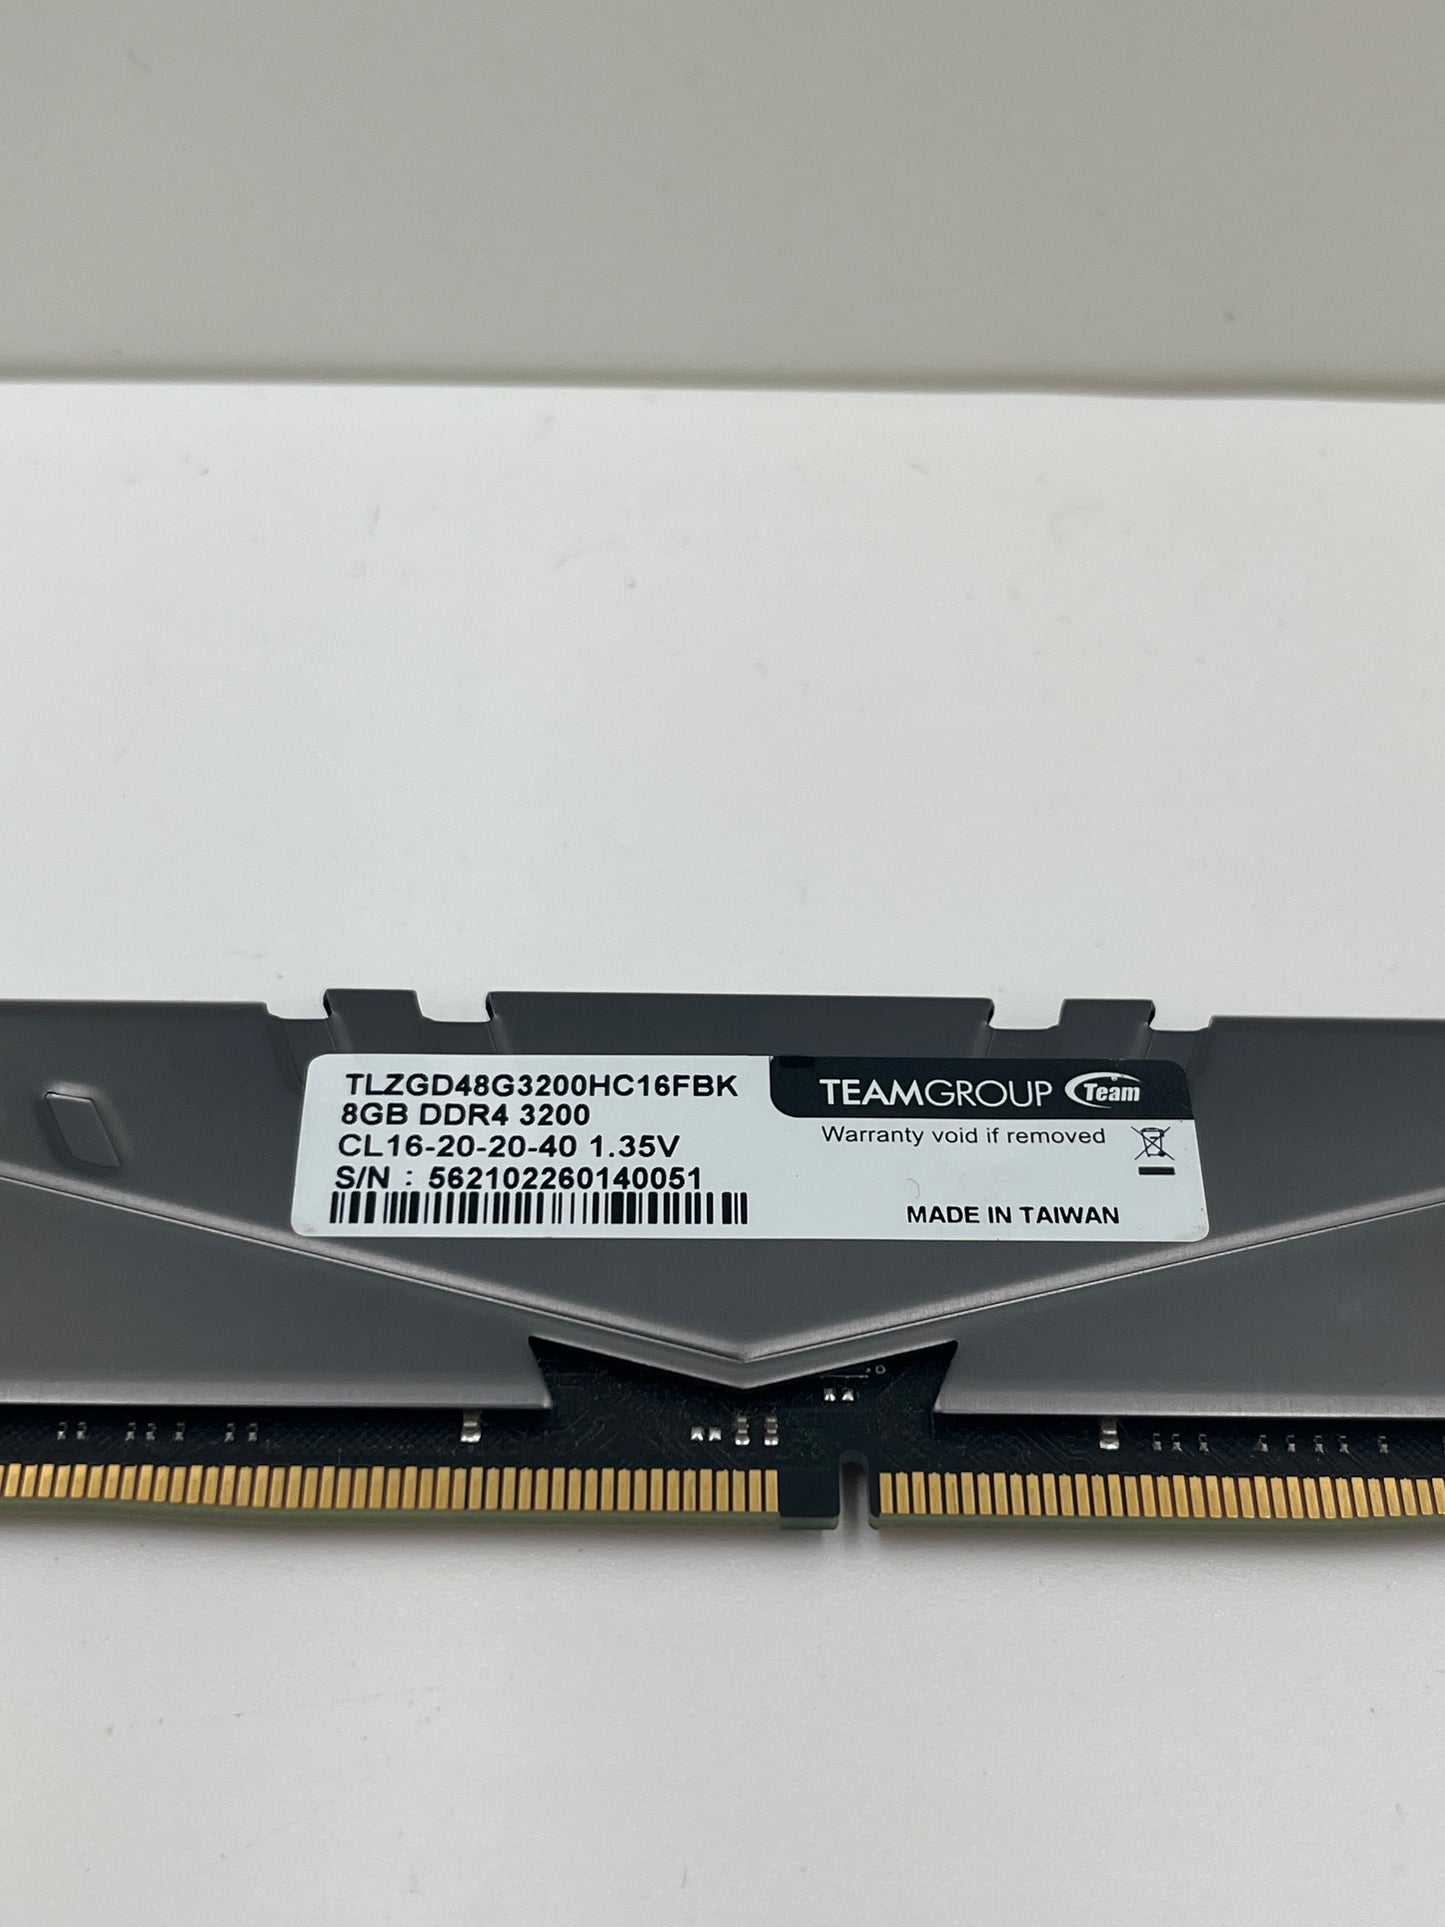 8GB Teamgroup T-Force Vulcan 3200MHz DDR4 RAM